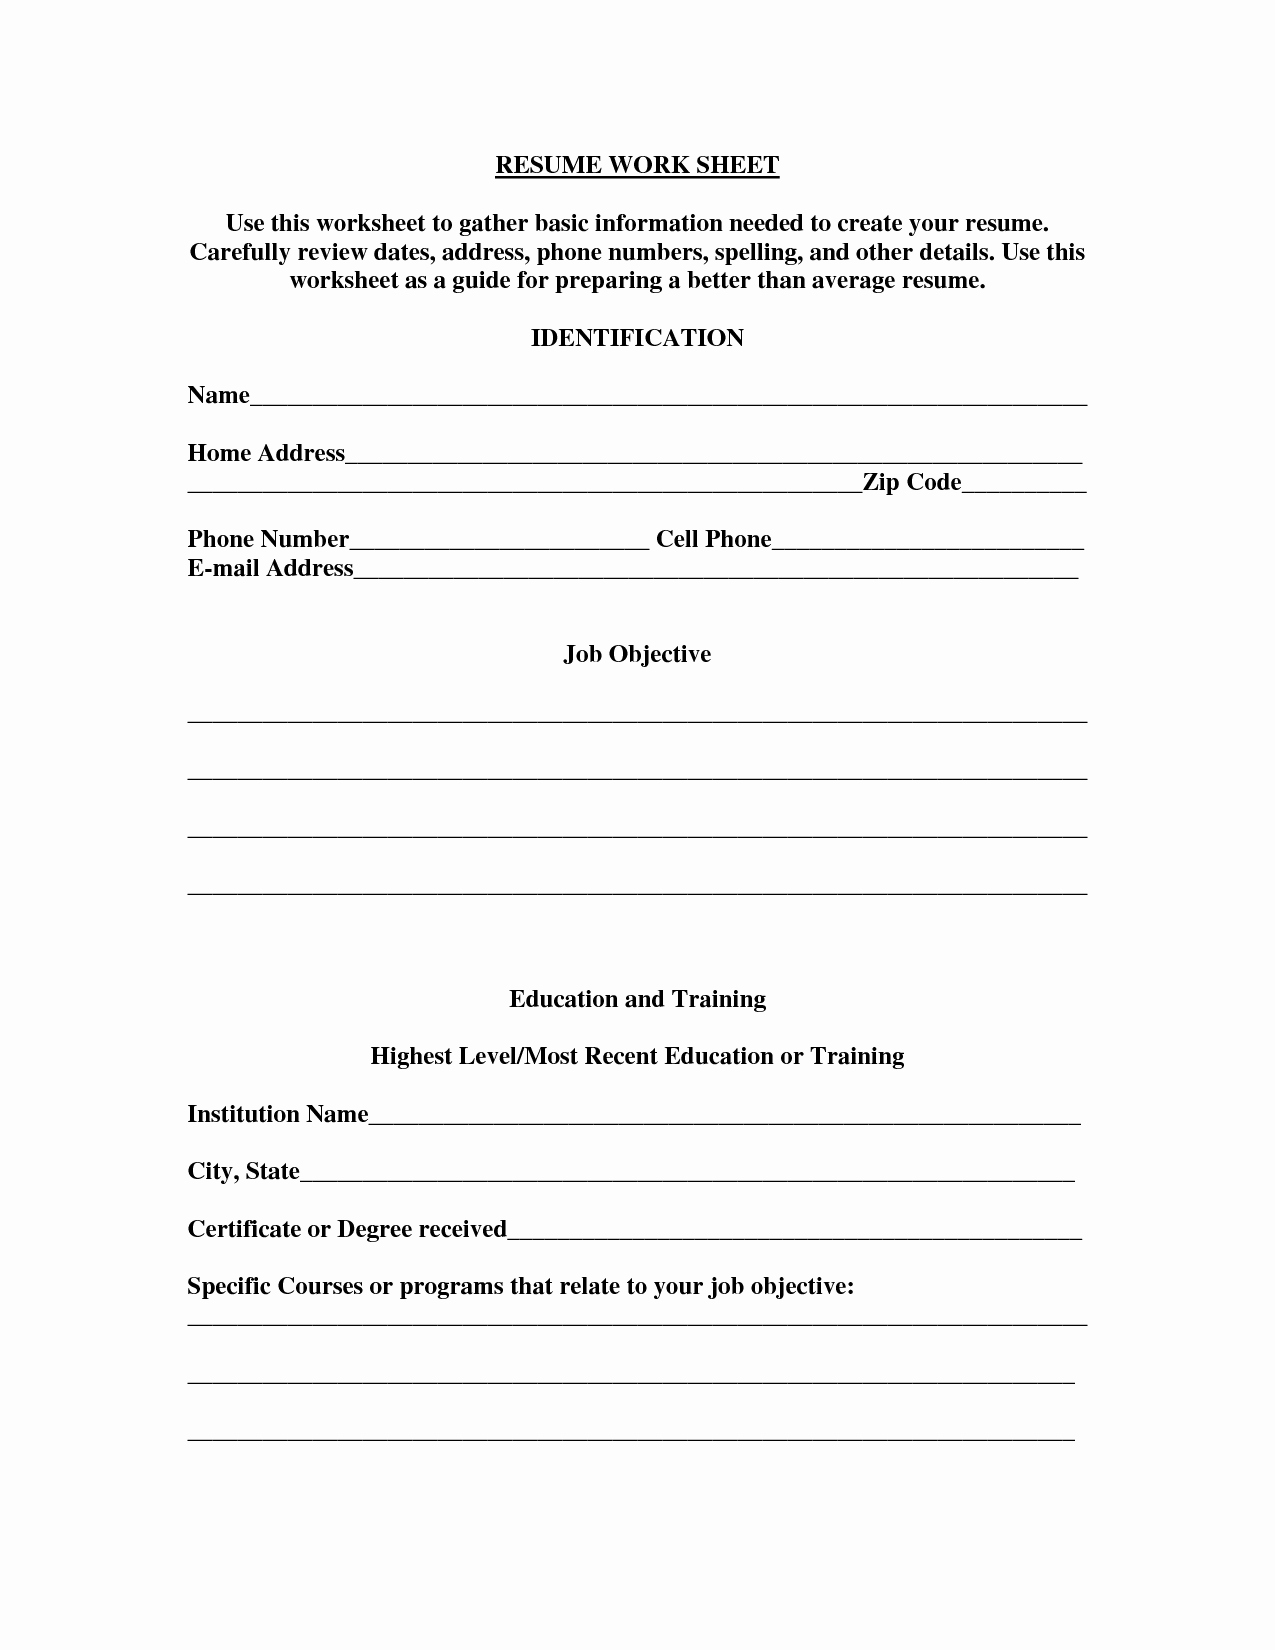 Resume Worksheet for Adults New 17 Best Of Creating A Resume Worksheet Fill In